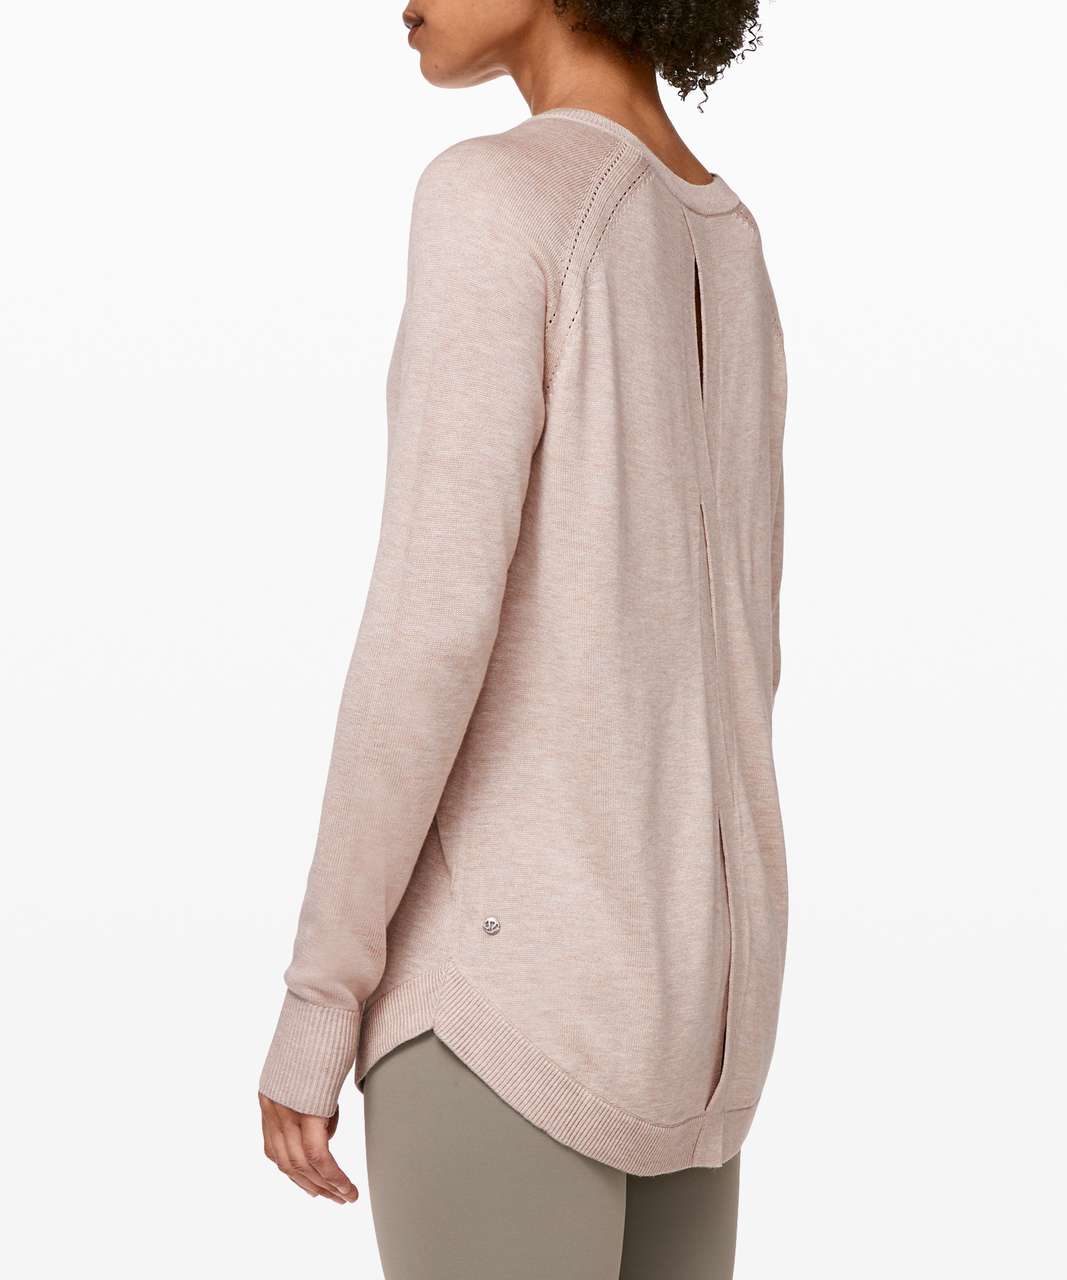 Lululemon Lead with Your Heart Sweater - Heathered Pink Bliss